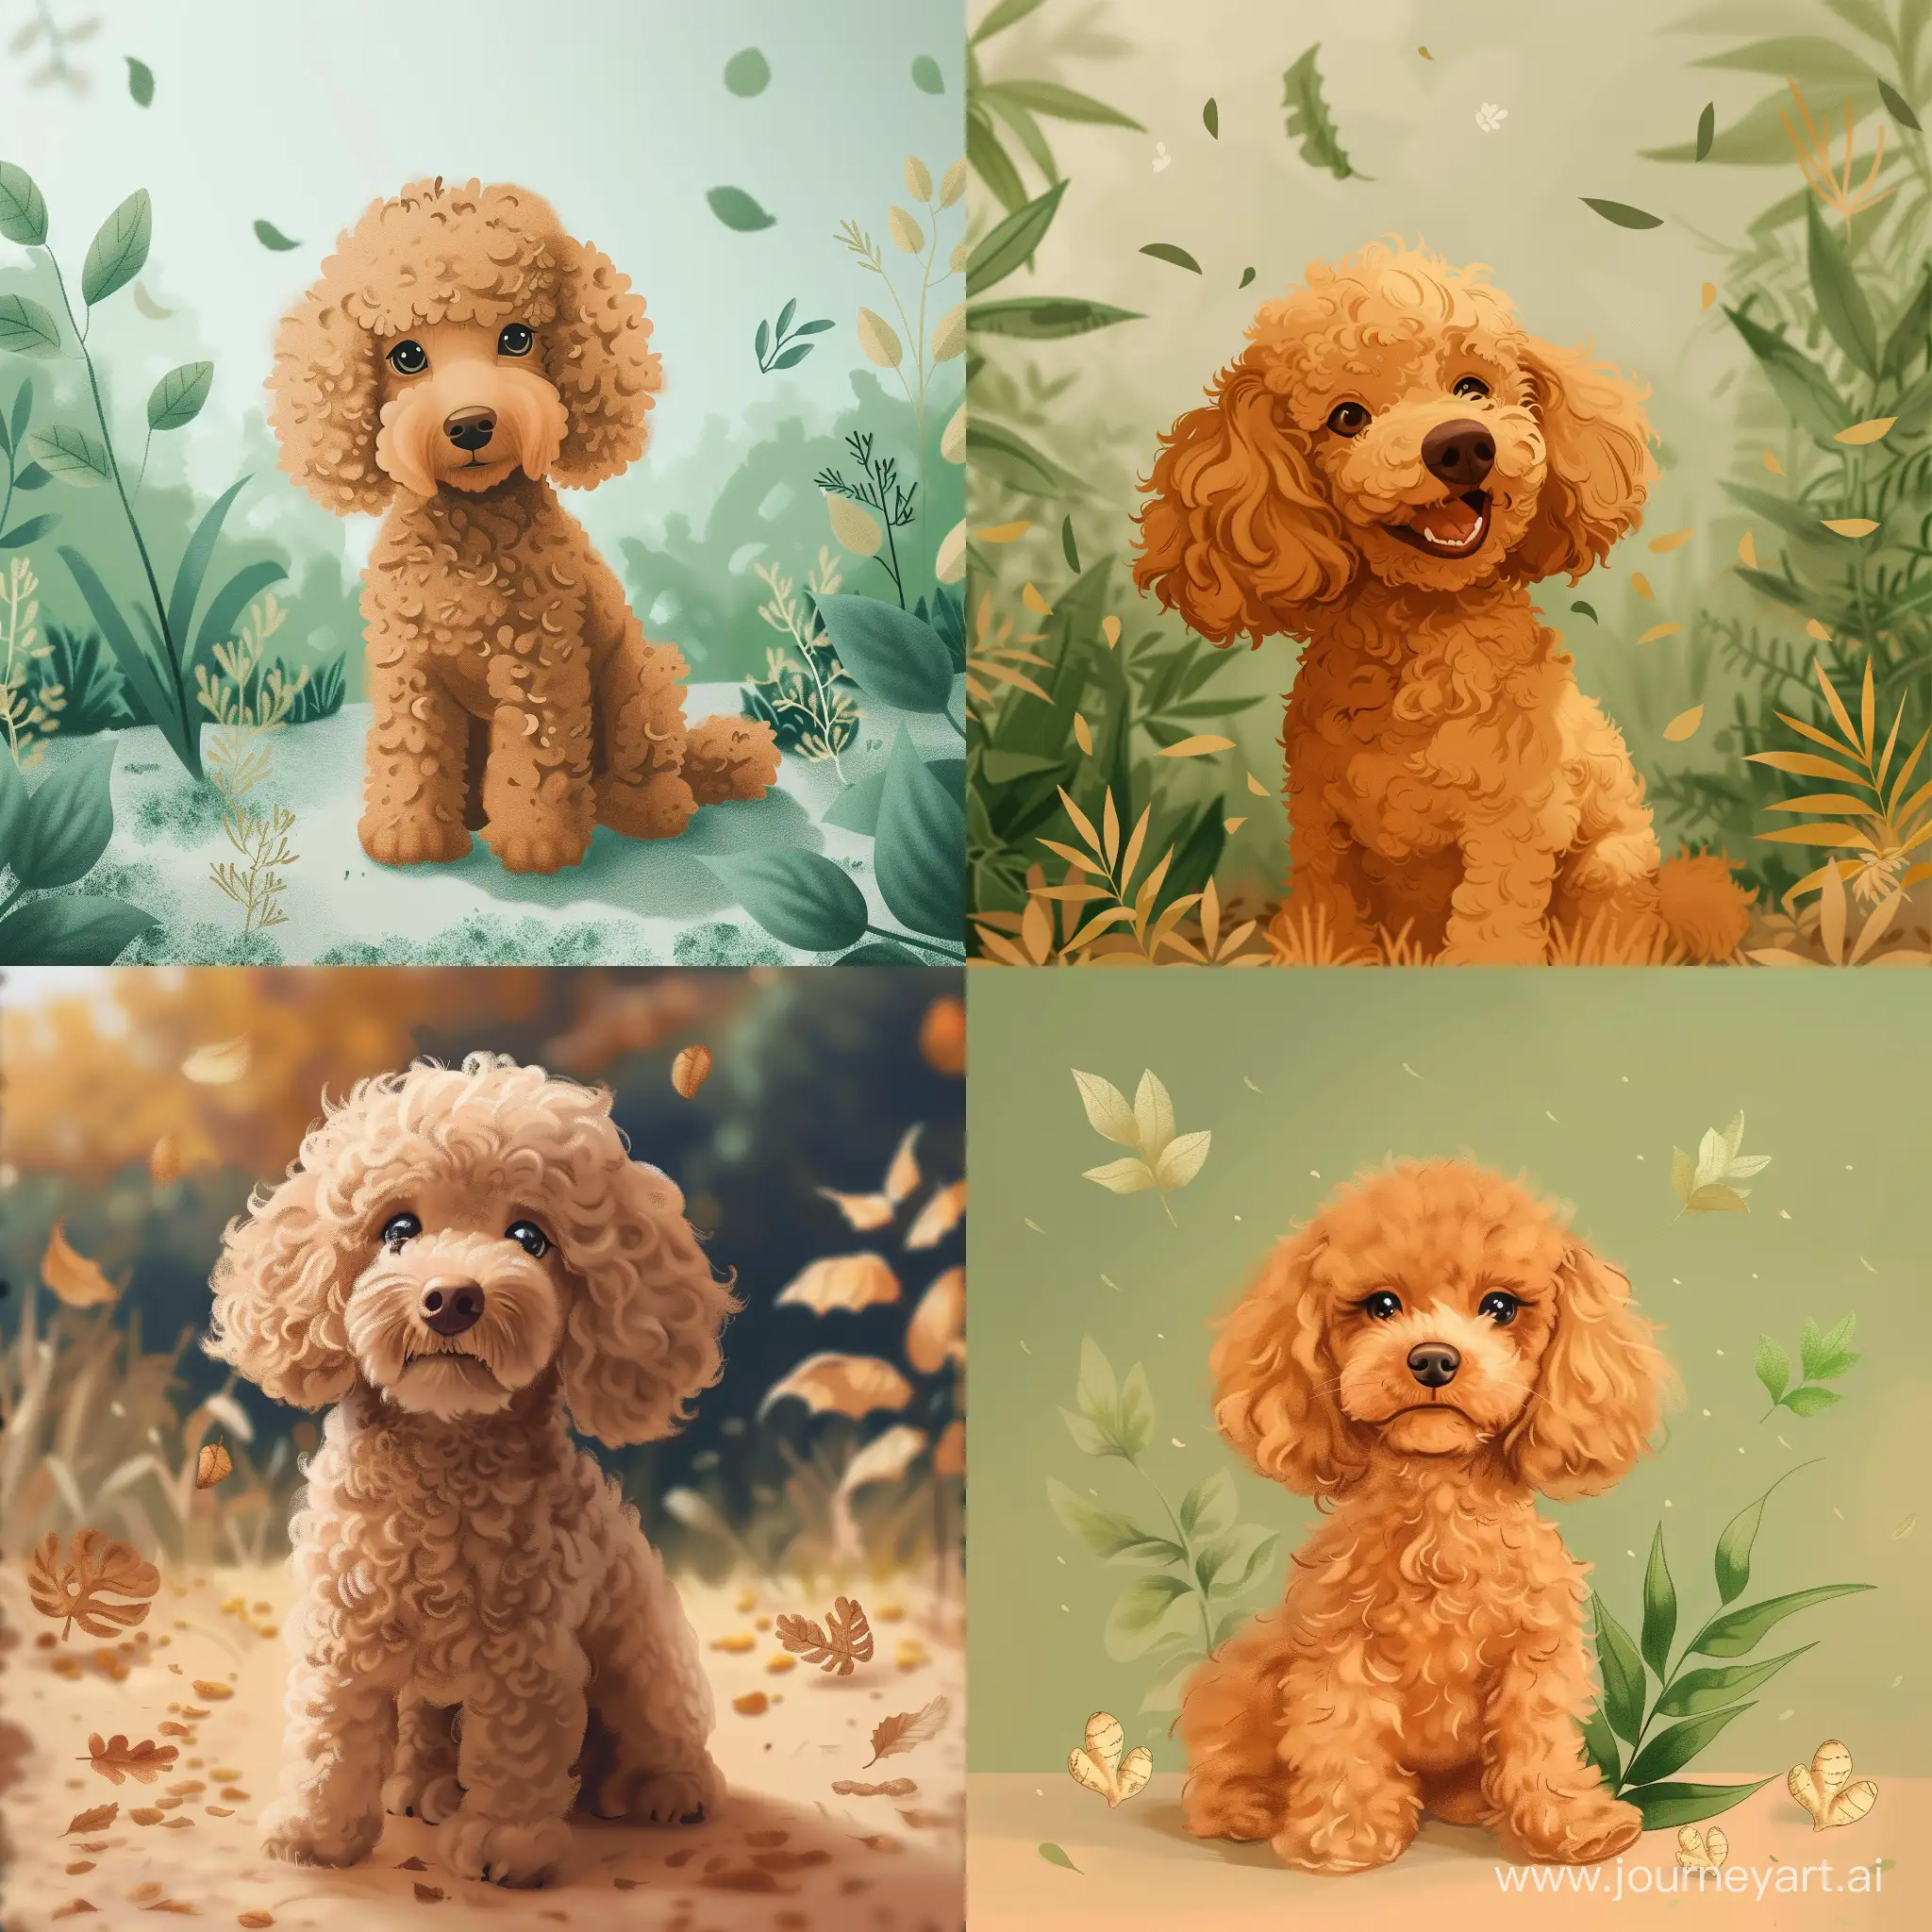 Sweet-Animated-Mini-Poodle-Ginger-with-Ginger-Plant-Background